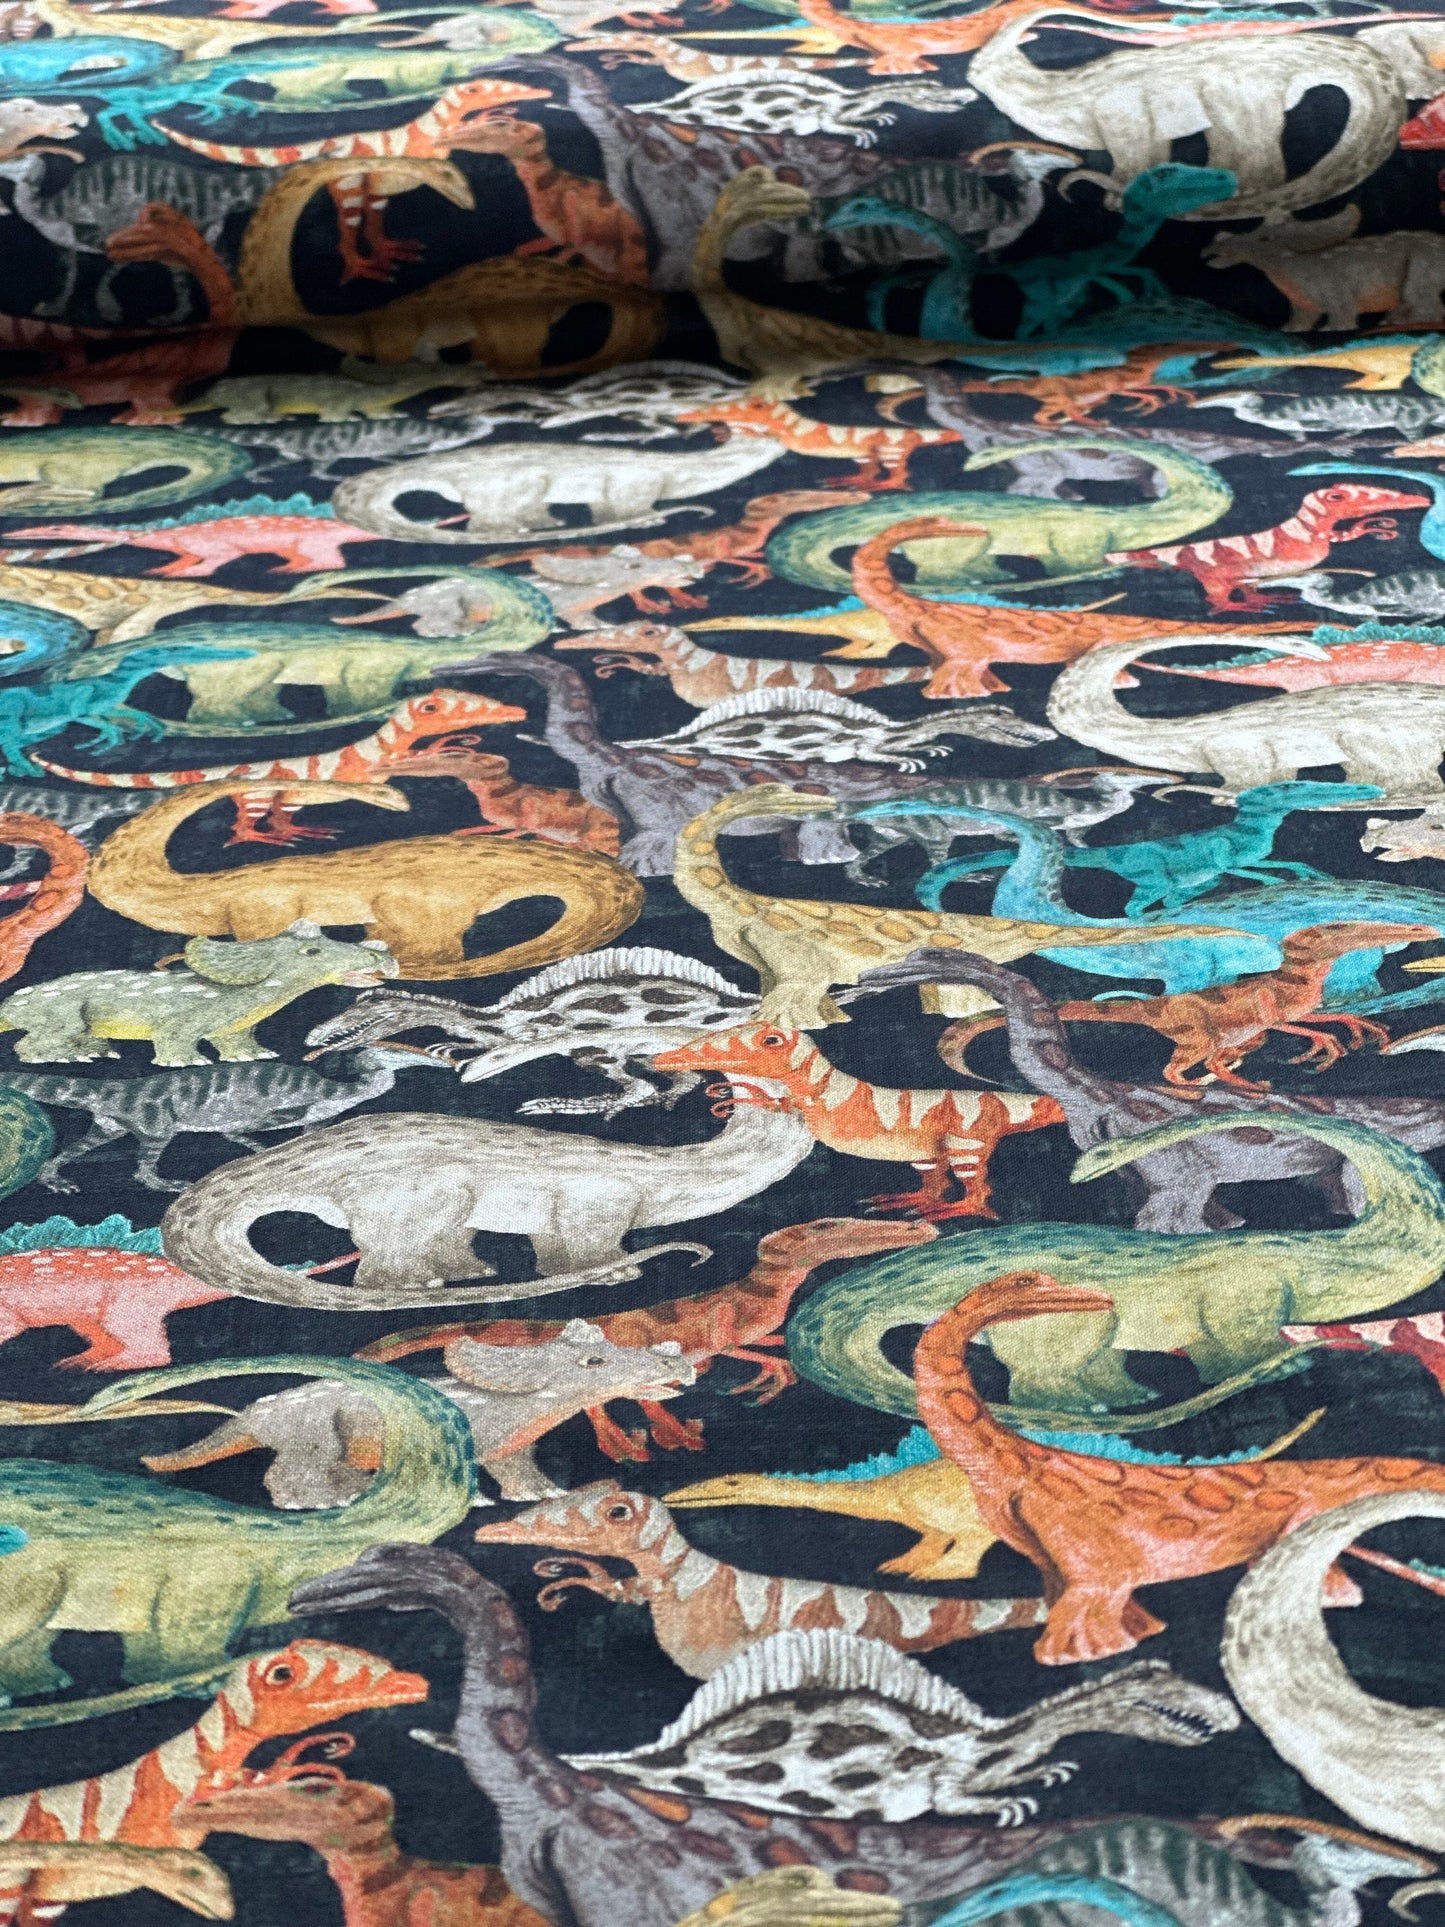 EVENING COMMUTE, Age of the Dinosaurs, Black, Windham Fabrics, Quilt Fabric, Cotton Fabric, Quilting, Dinosaur Fabric, Fabric By The Yard